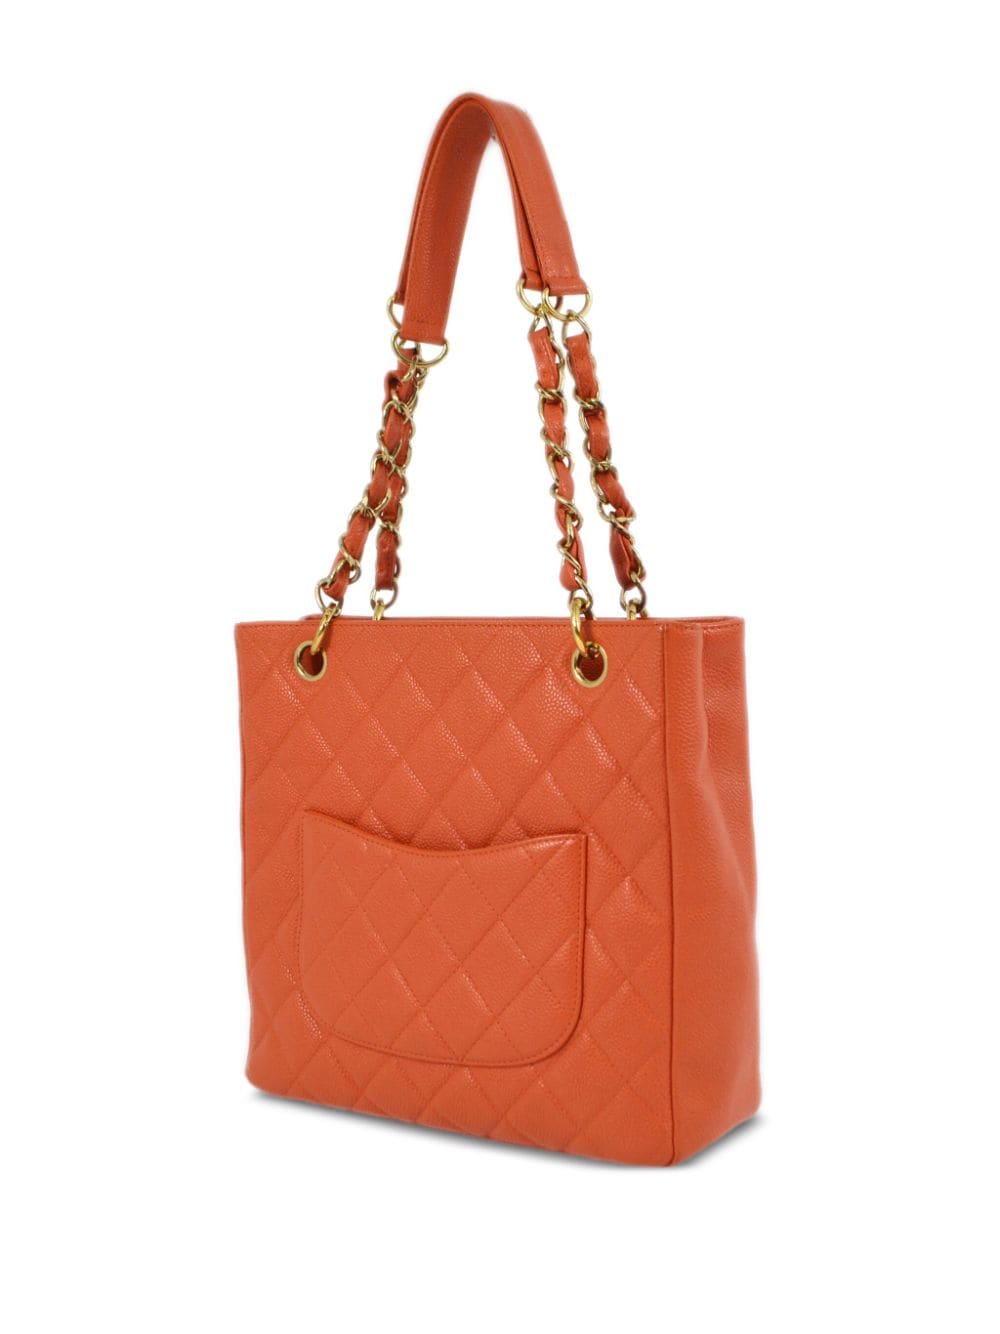 Pre-owned Chanel 2003 Petite Shopping Tote Bag In Orange